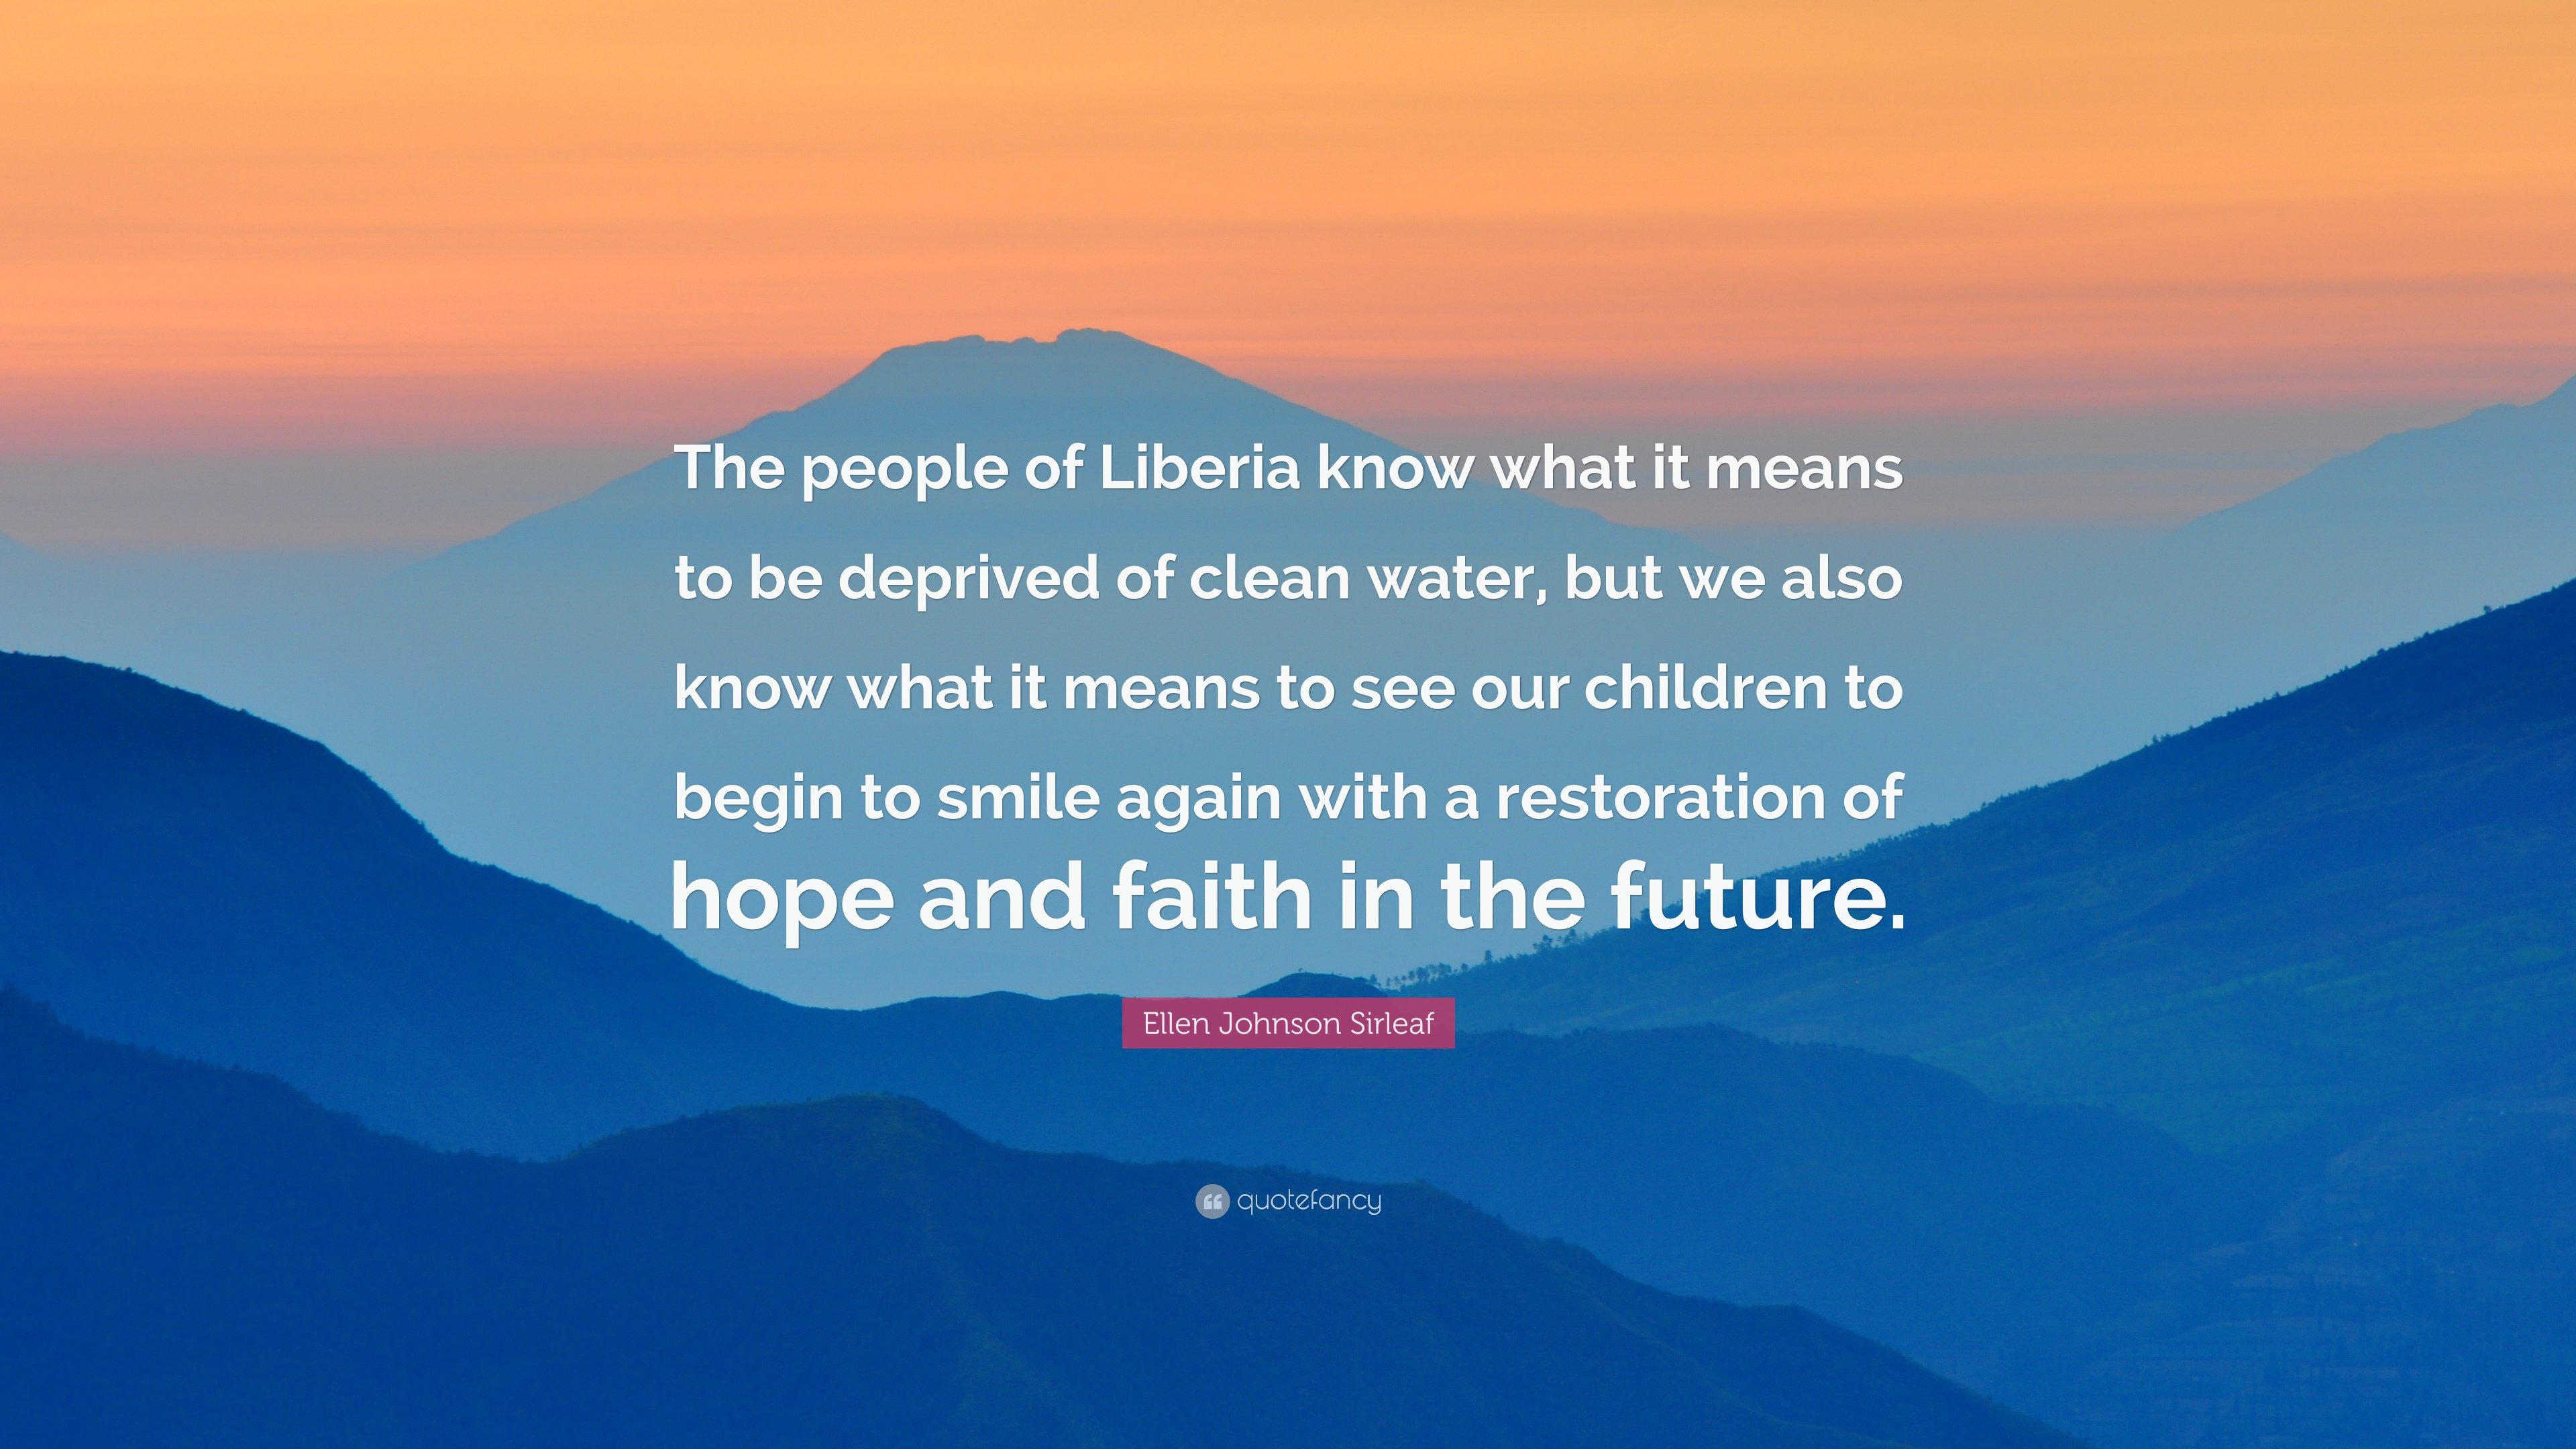 Ellen Johnson Sirleaf Quote: “The people of Liberia know what it